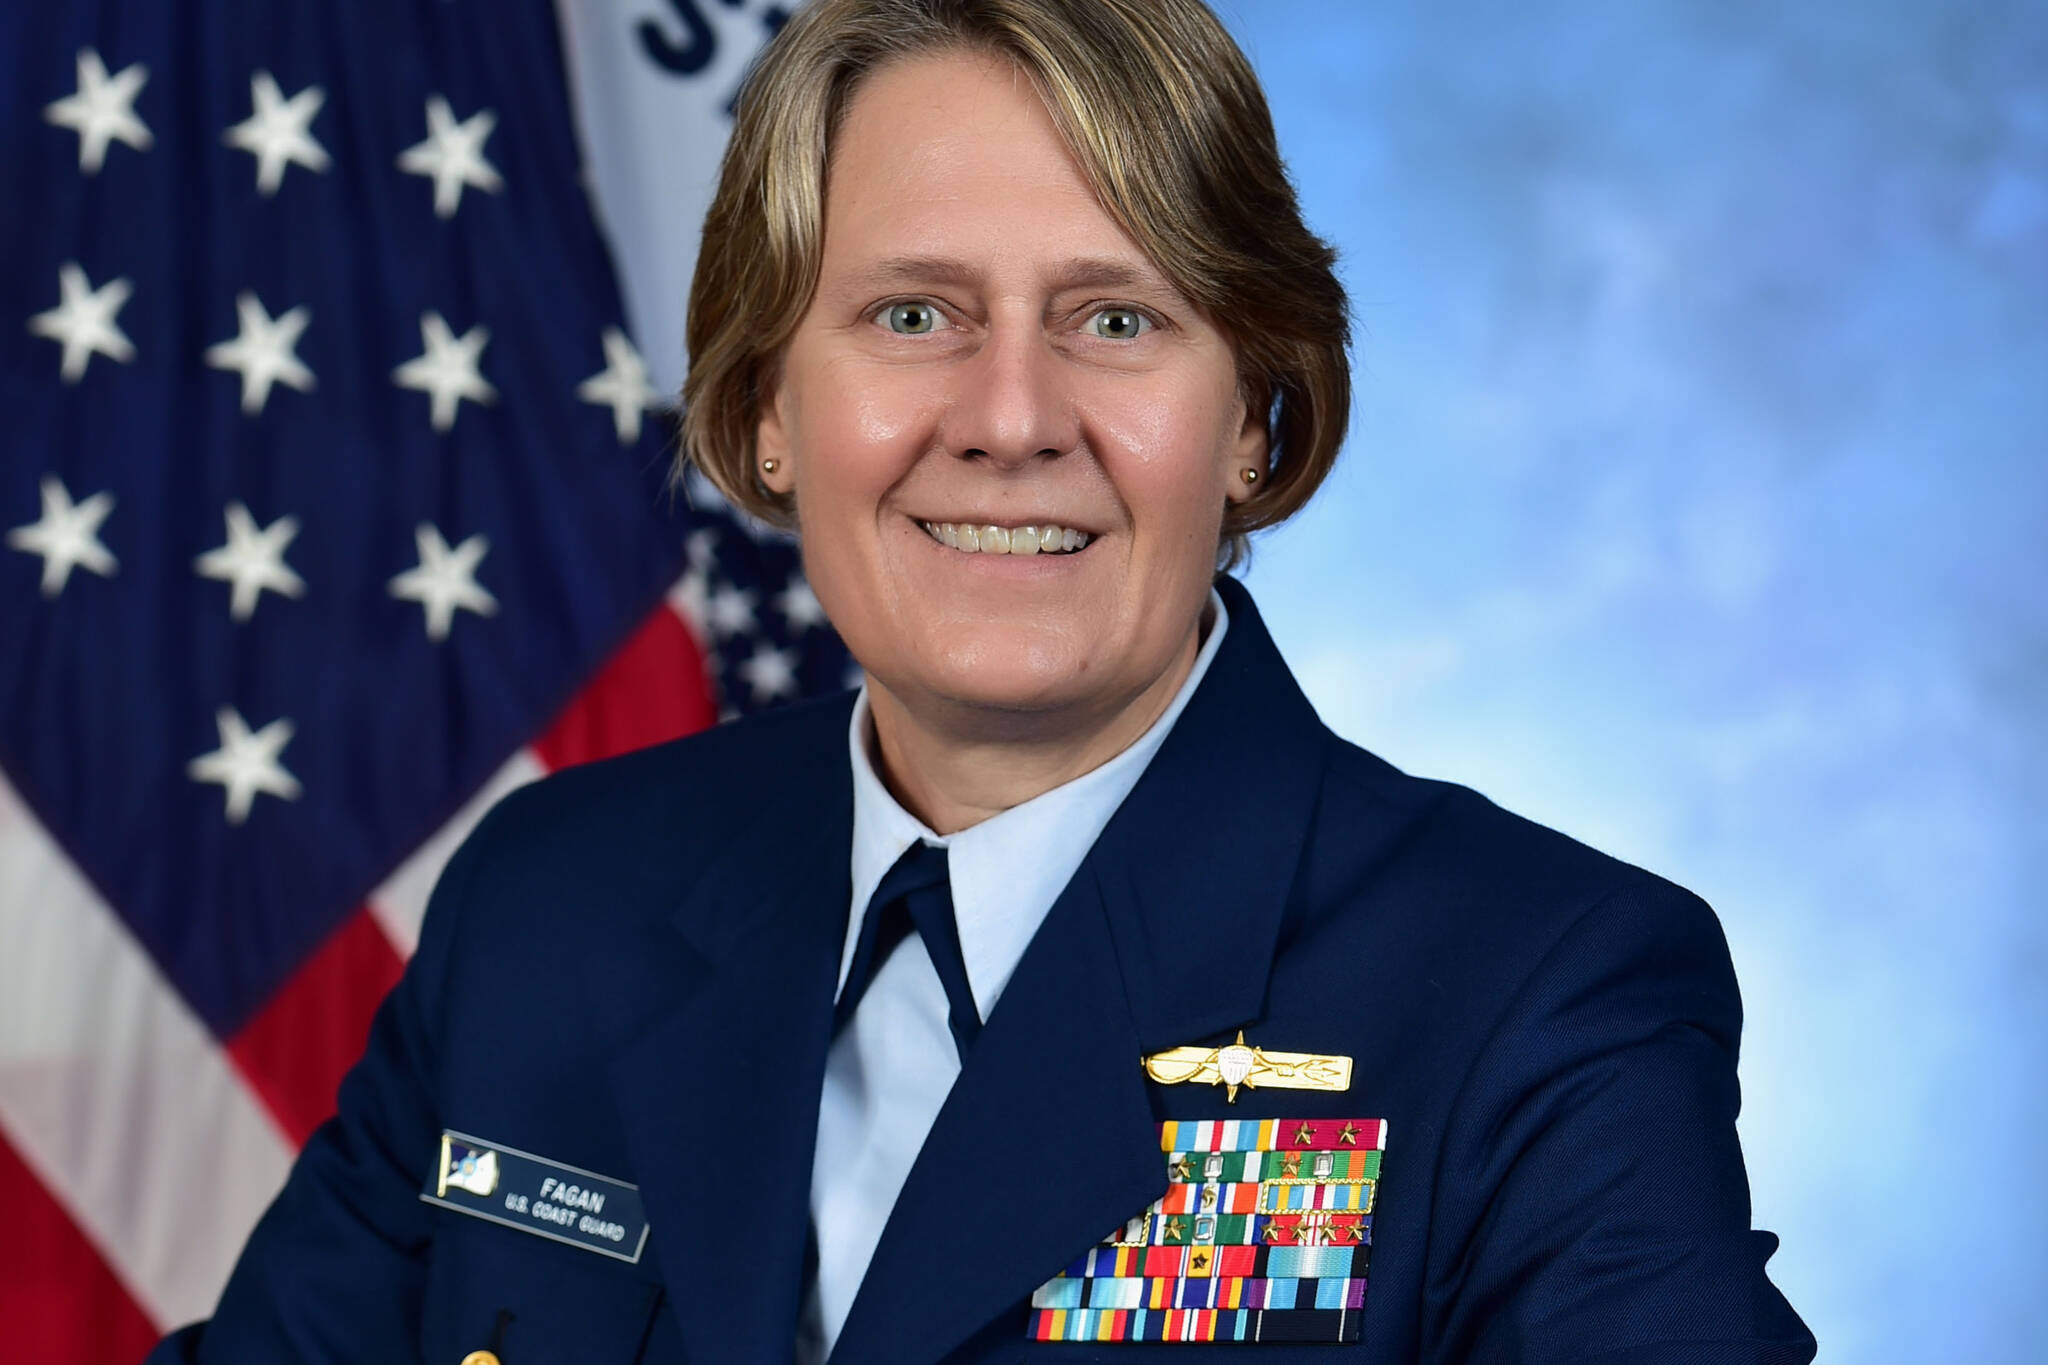 Adm. Linda L. Fagan has been nominated by the president to serve as the 27th Commandant of the U.S. Coast Guard. (Courtesy photo / USCG)